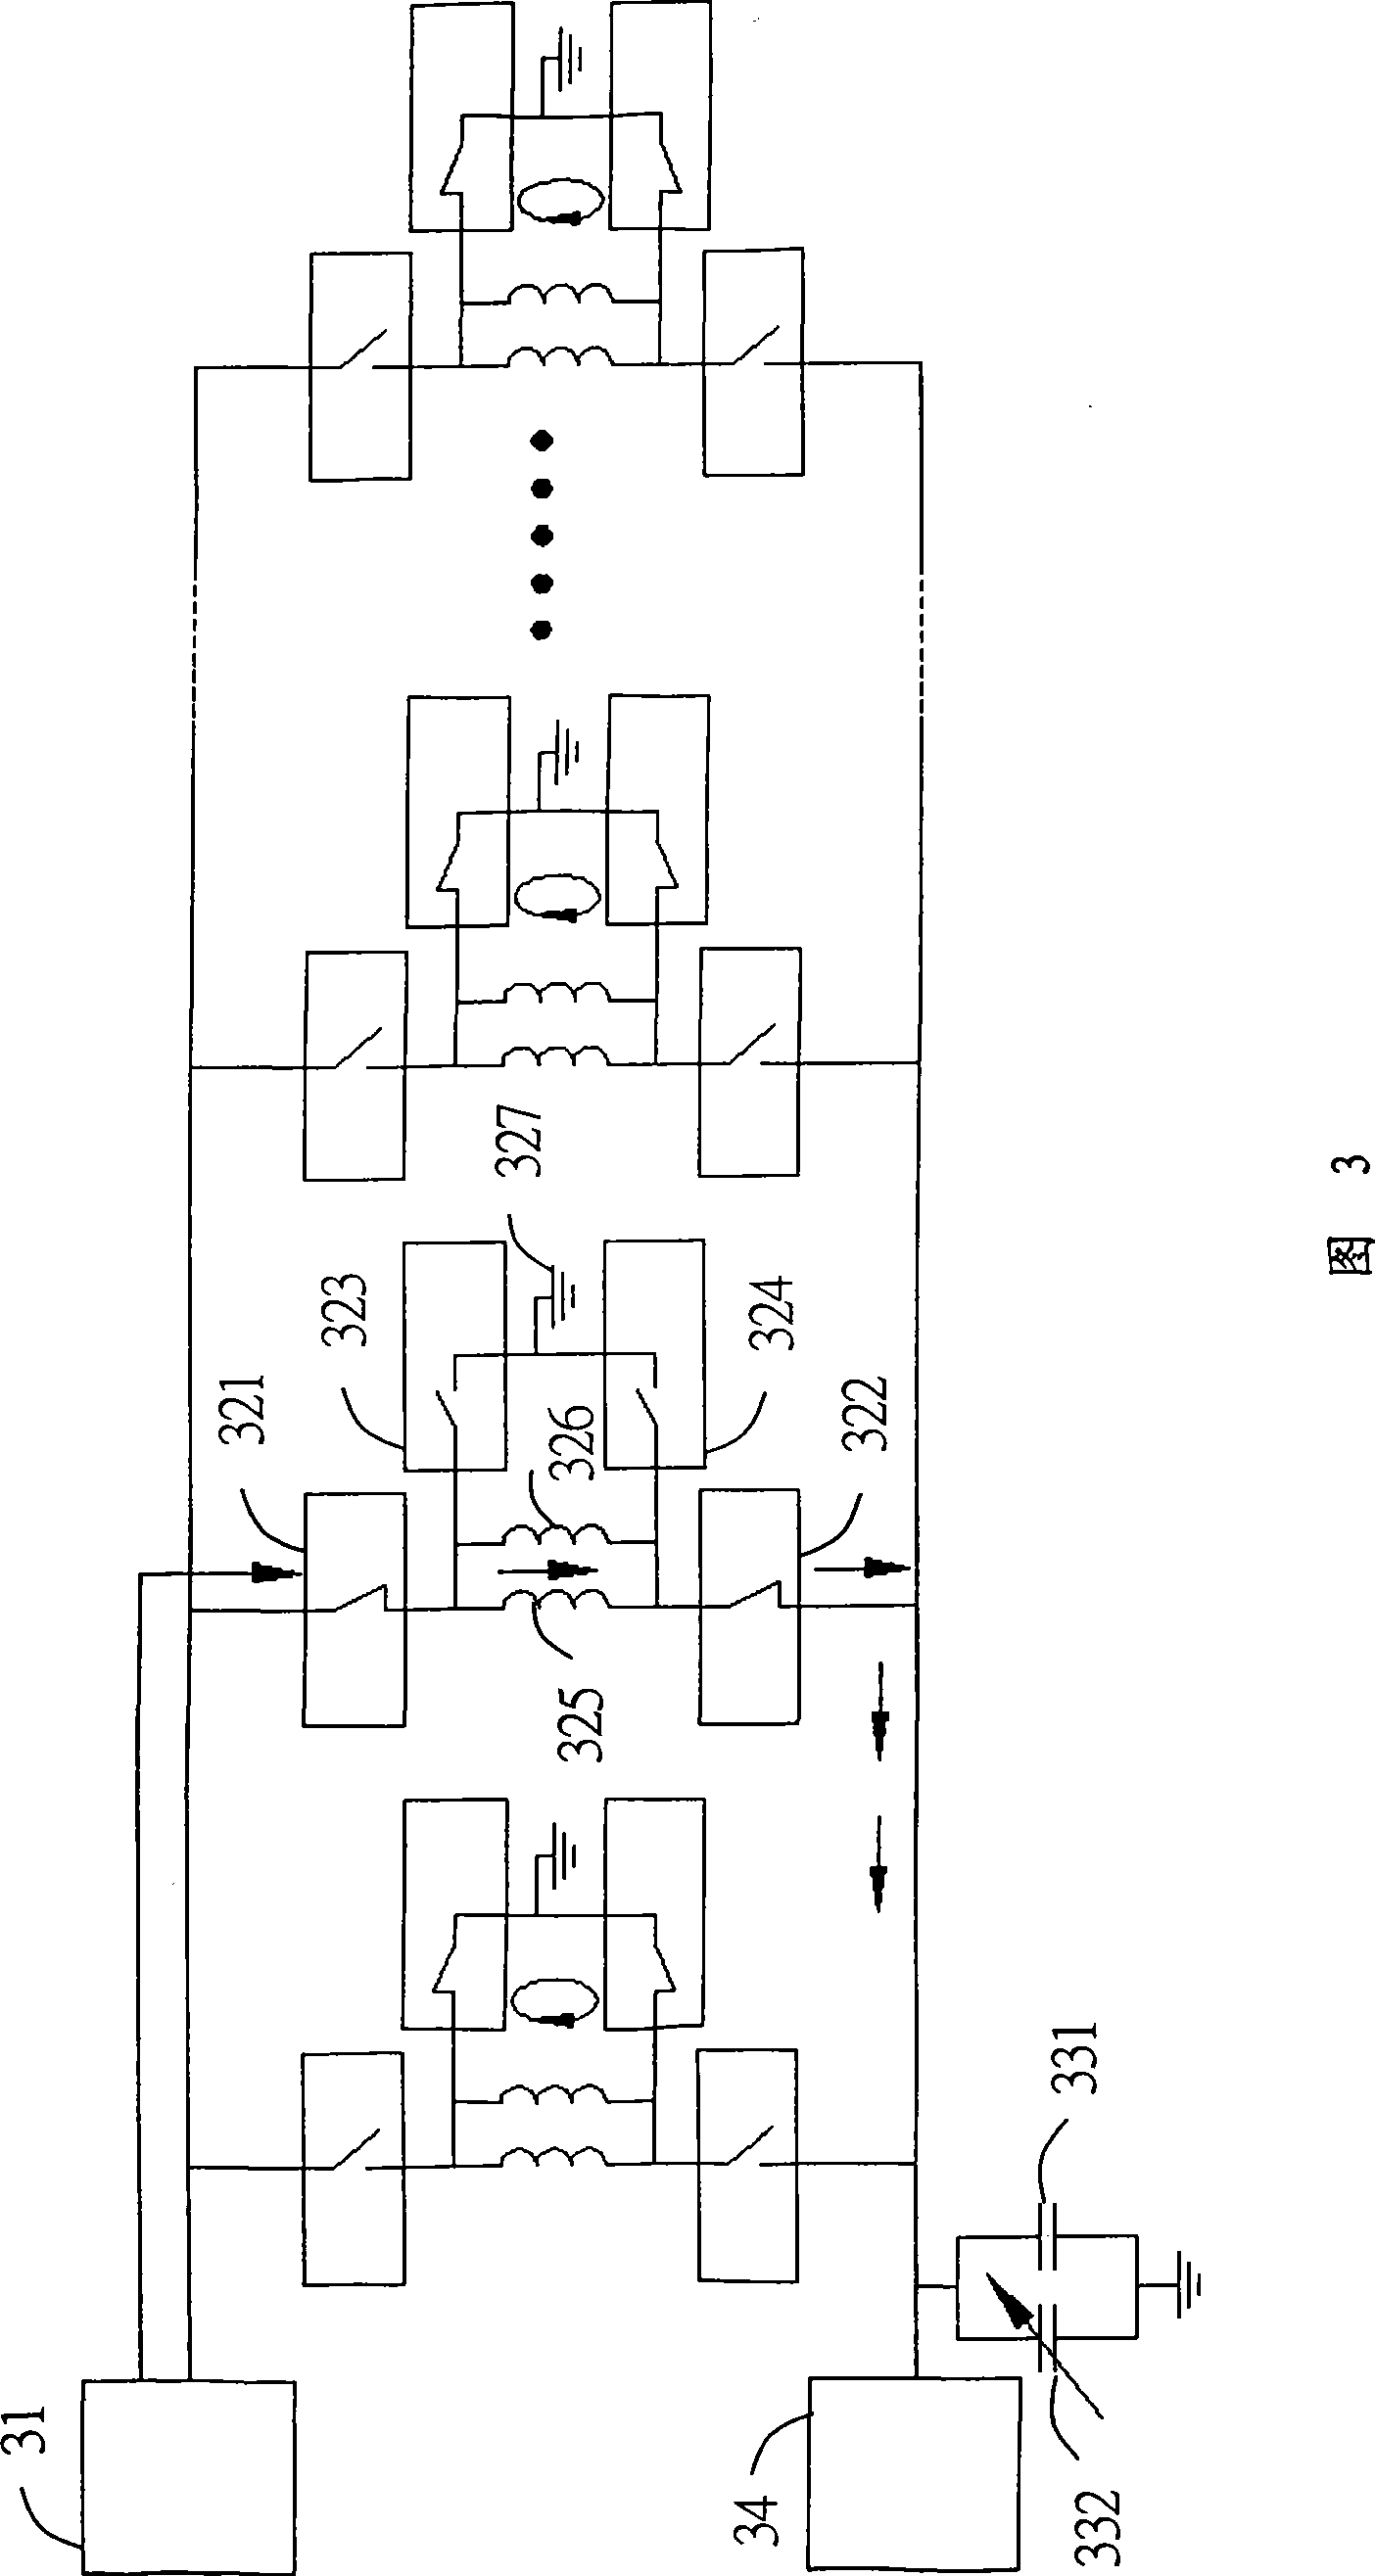 Radio frequency identification positioning apparatus and method